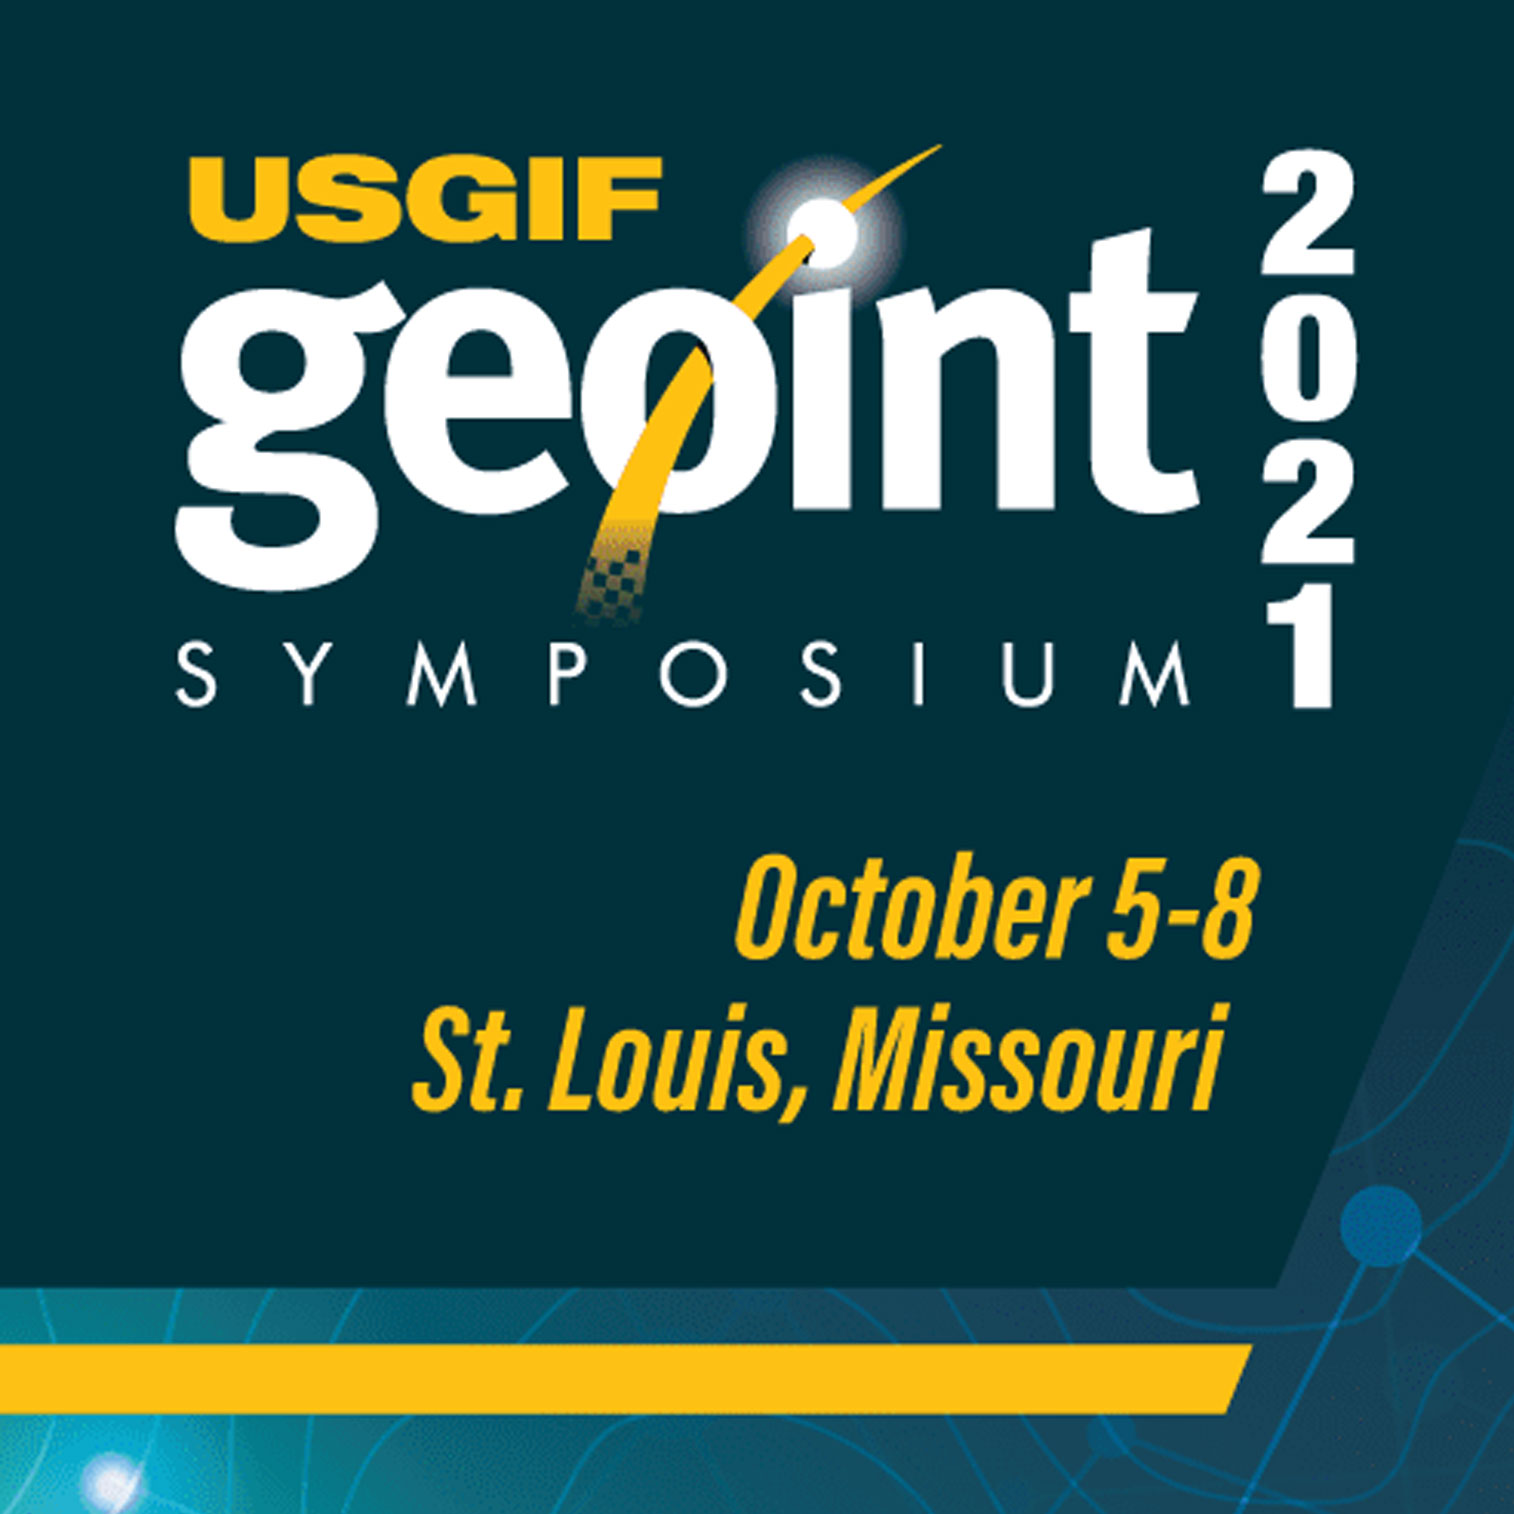 Preligens to be present at GEOINT 2021 Symposium